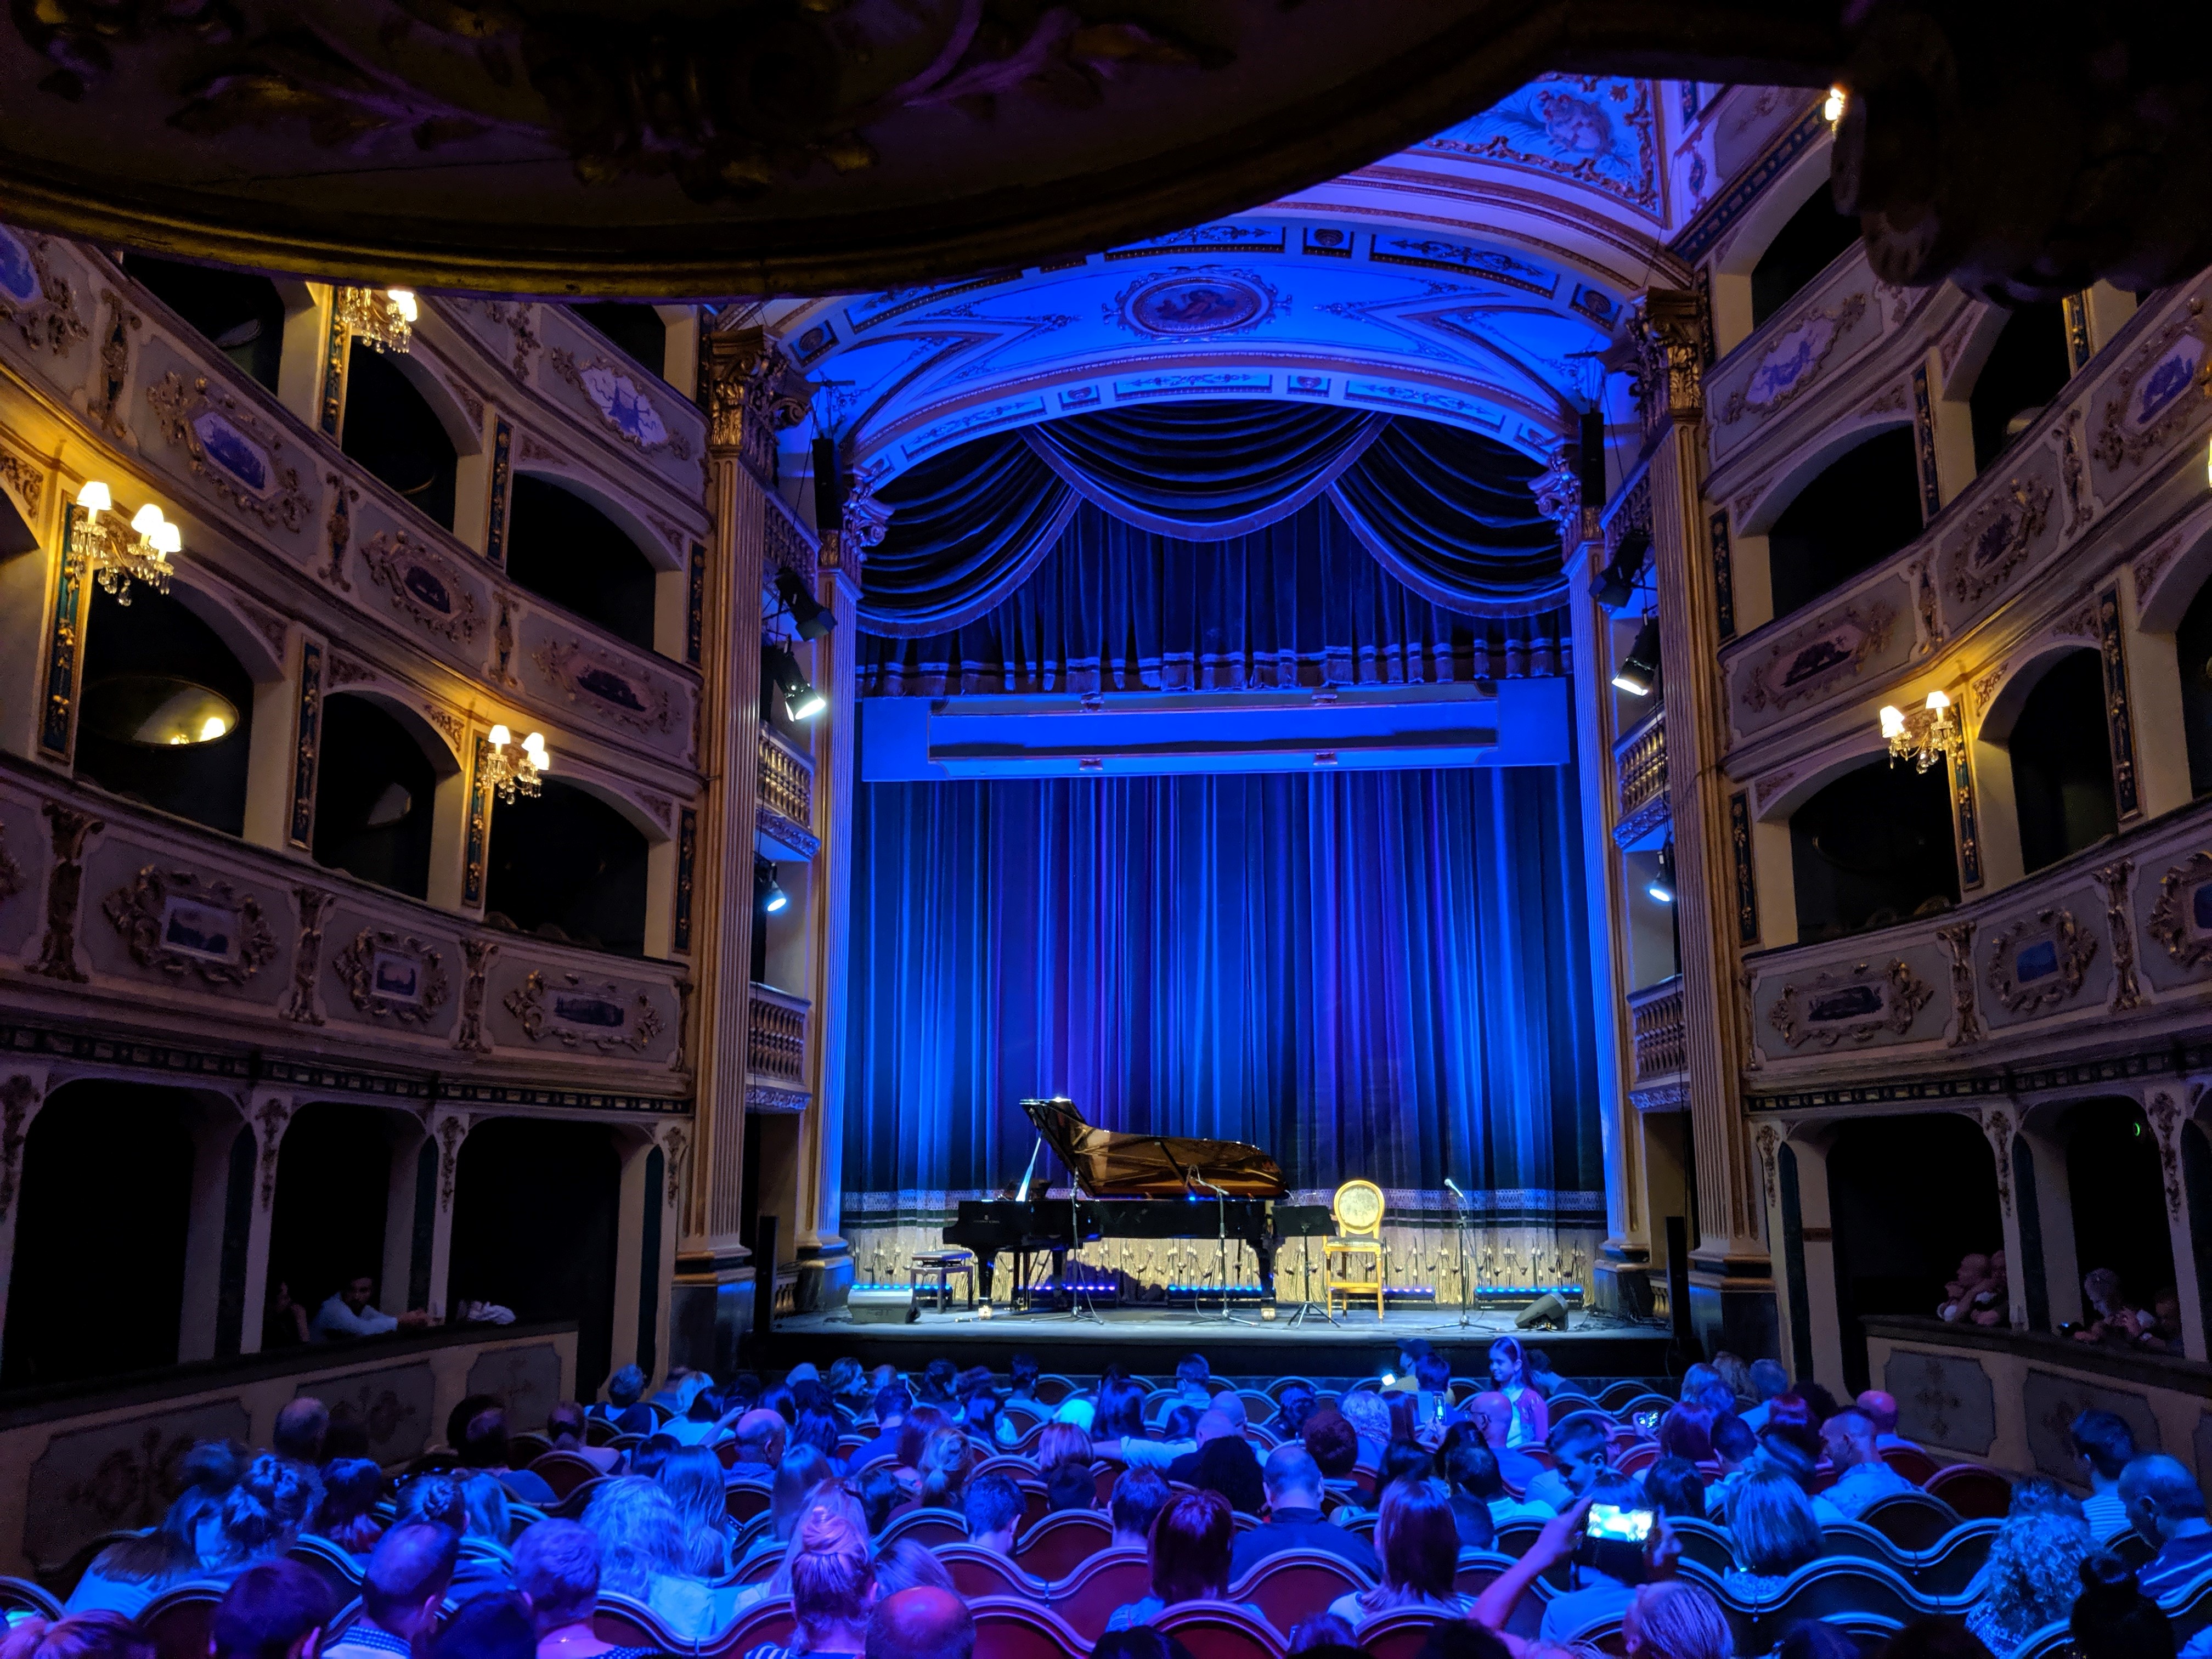 Learn English and Culture - The Manoel Theatre in Valletta Malta during Notte Bianca in October 2